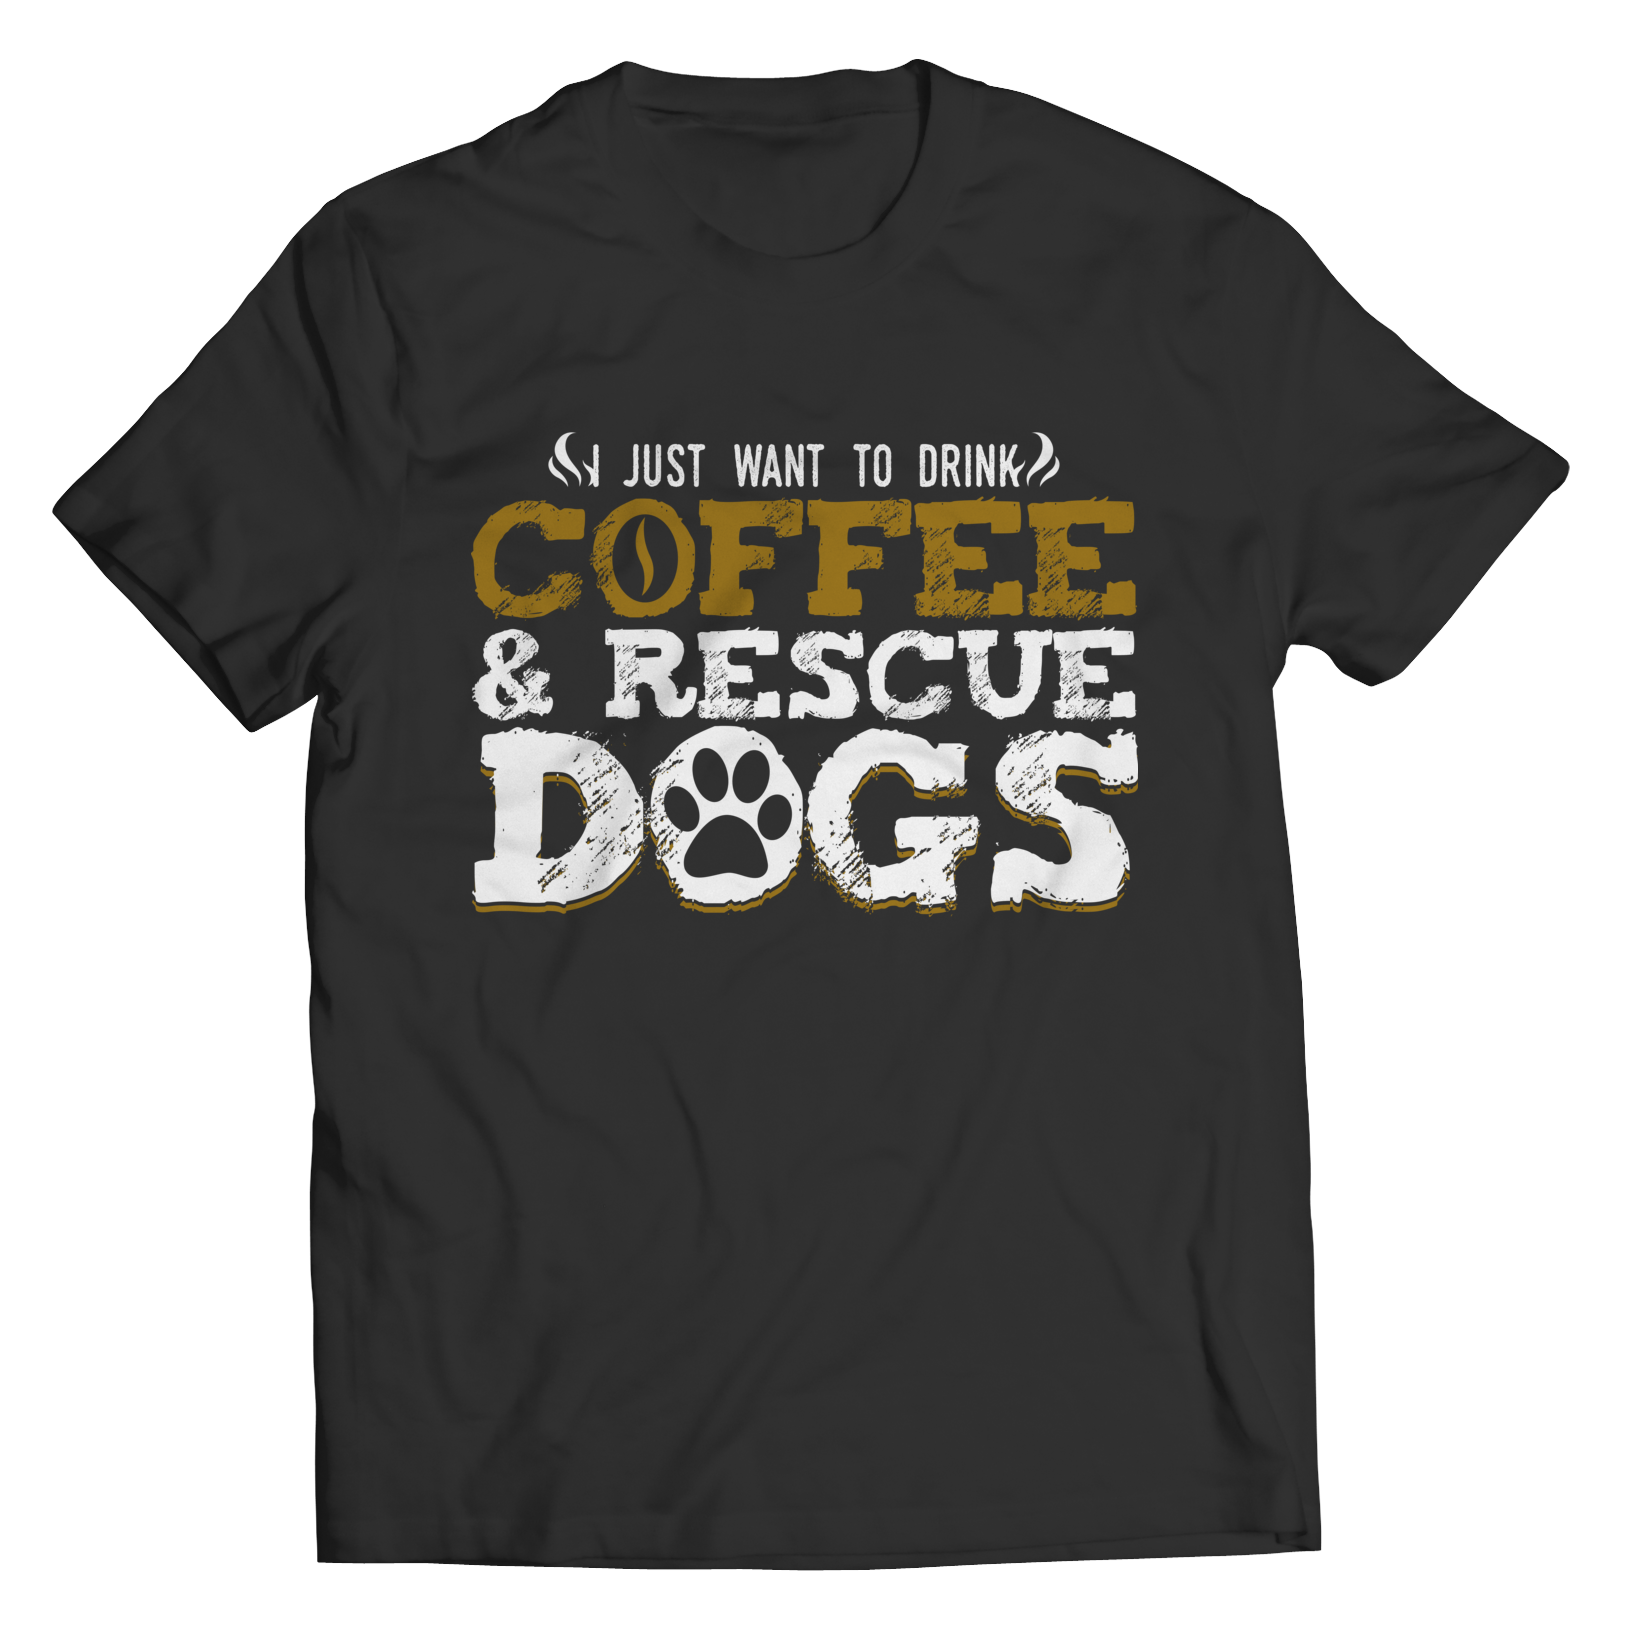 Drink Coffee And Rescue Dogs